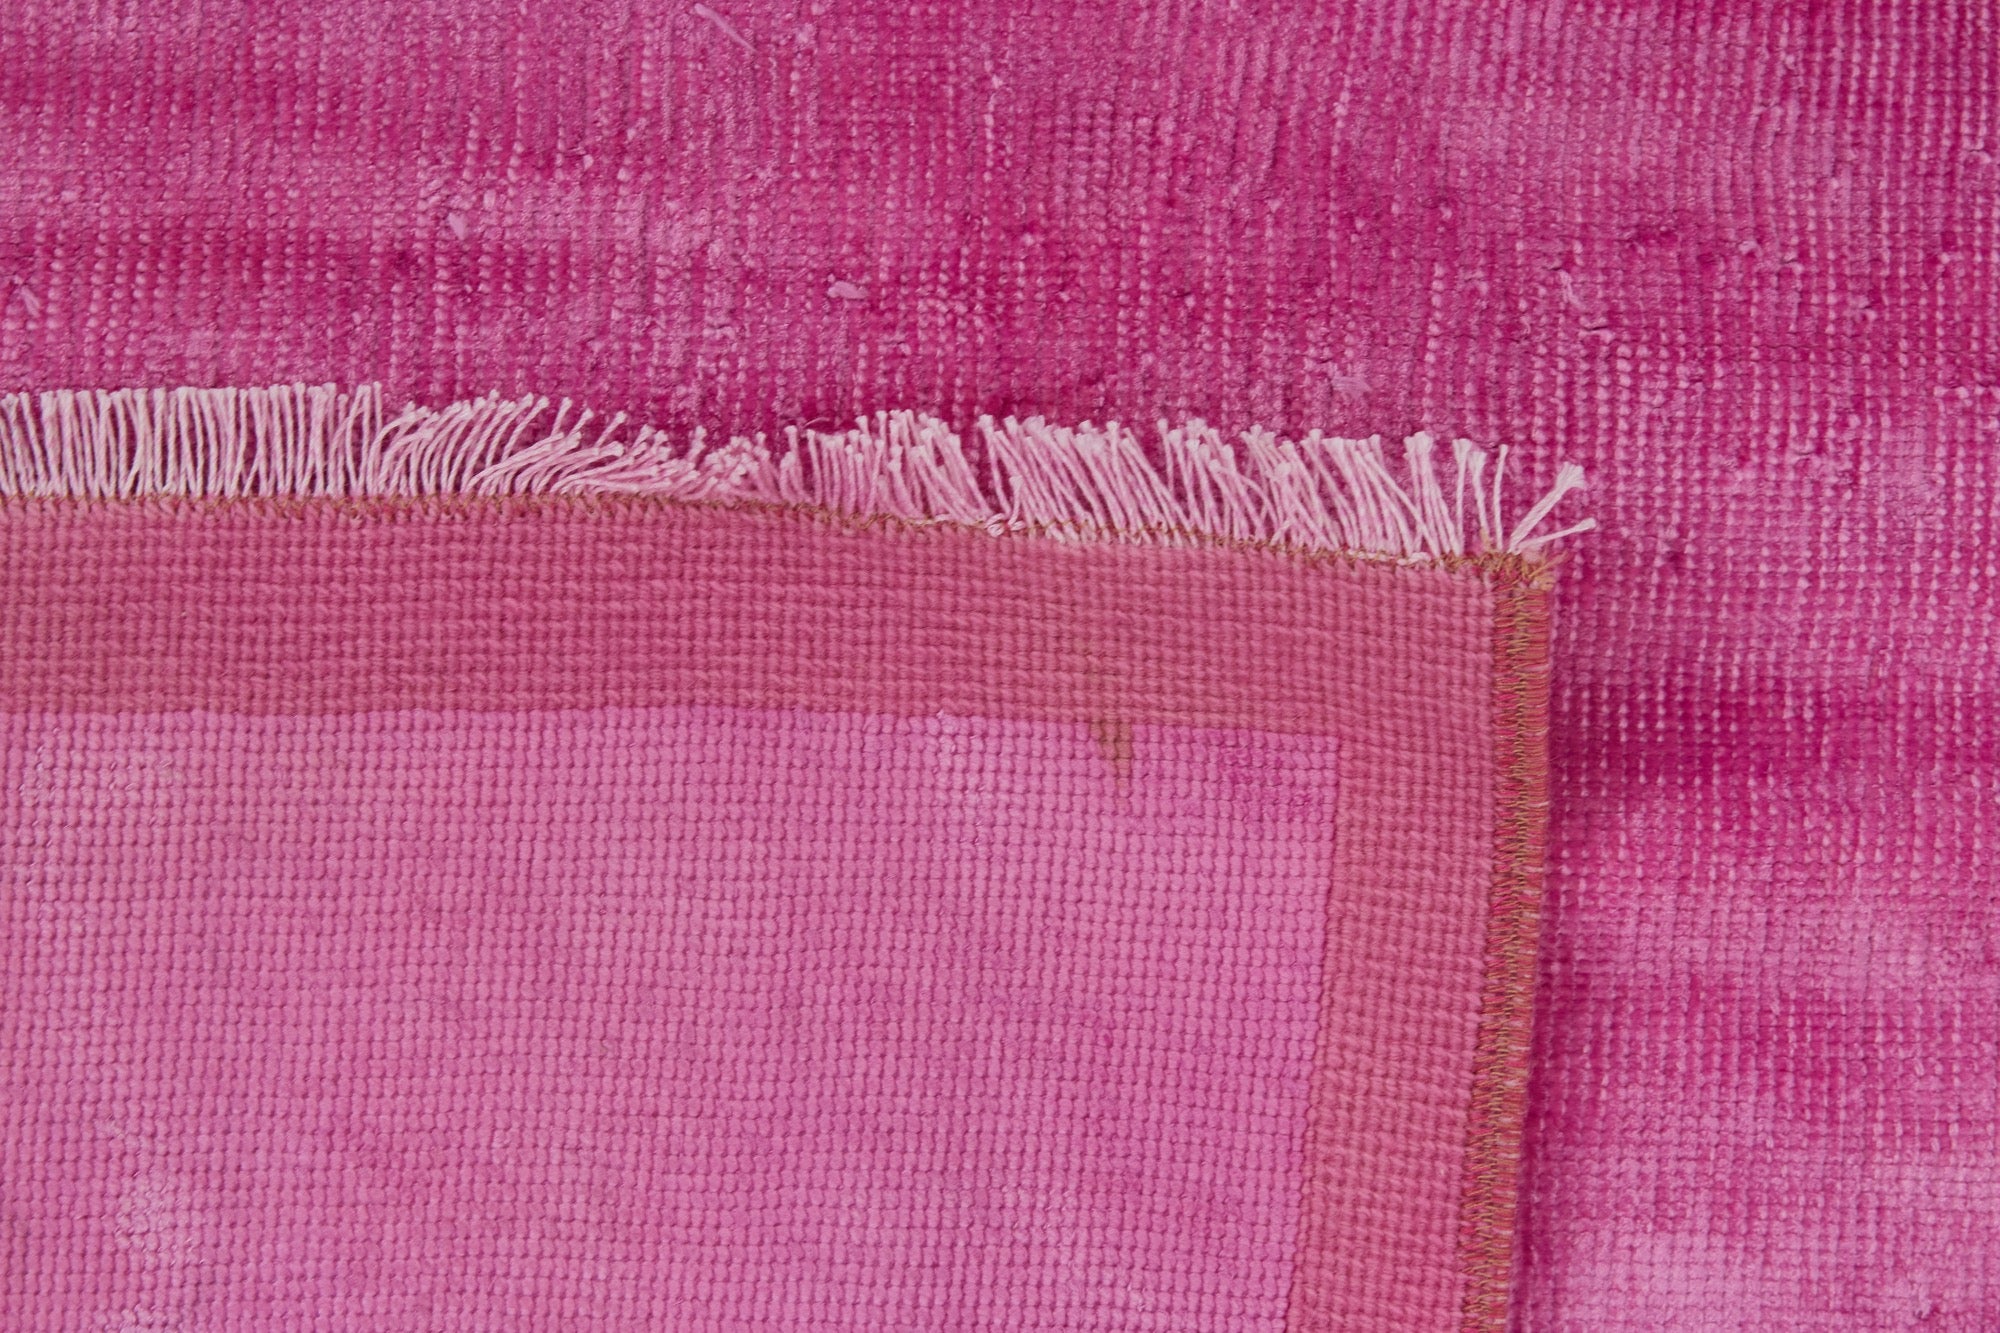 Carina | One-of-a-Kind Pink Sophistication | Sophisticated Bamboo Silk Carpet | Kuden Rugs